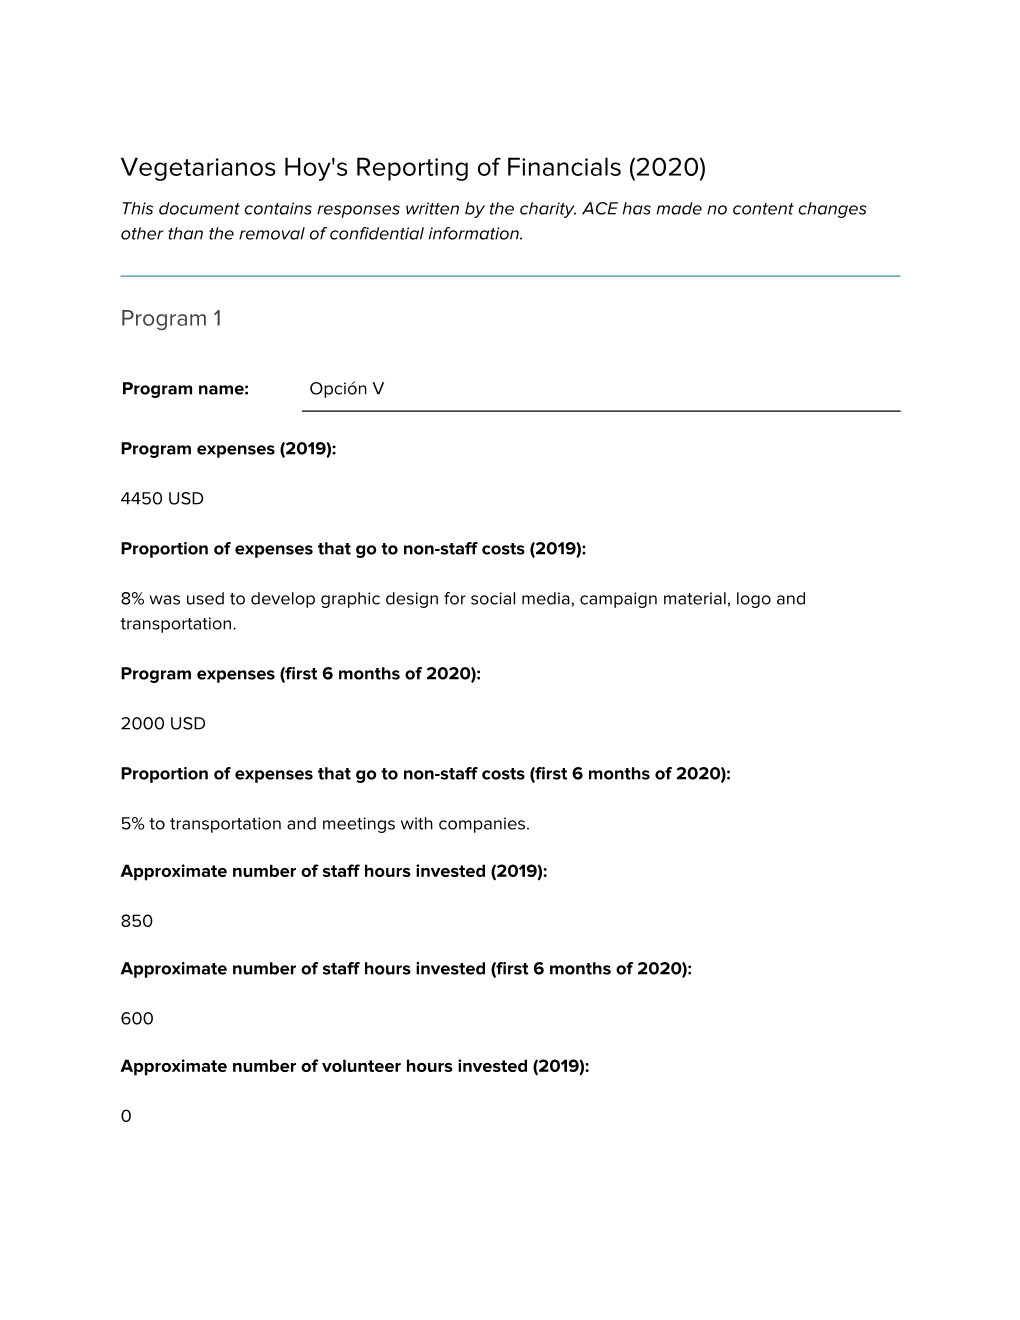 Vegetarianos Hoy's Reporting of Financials (2020) This Document Contains Responses Written by the Charity